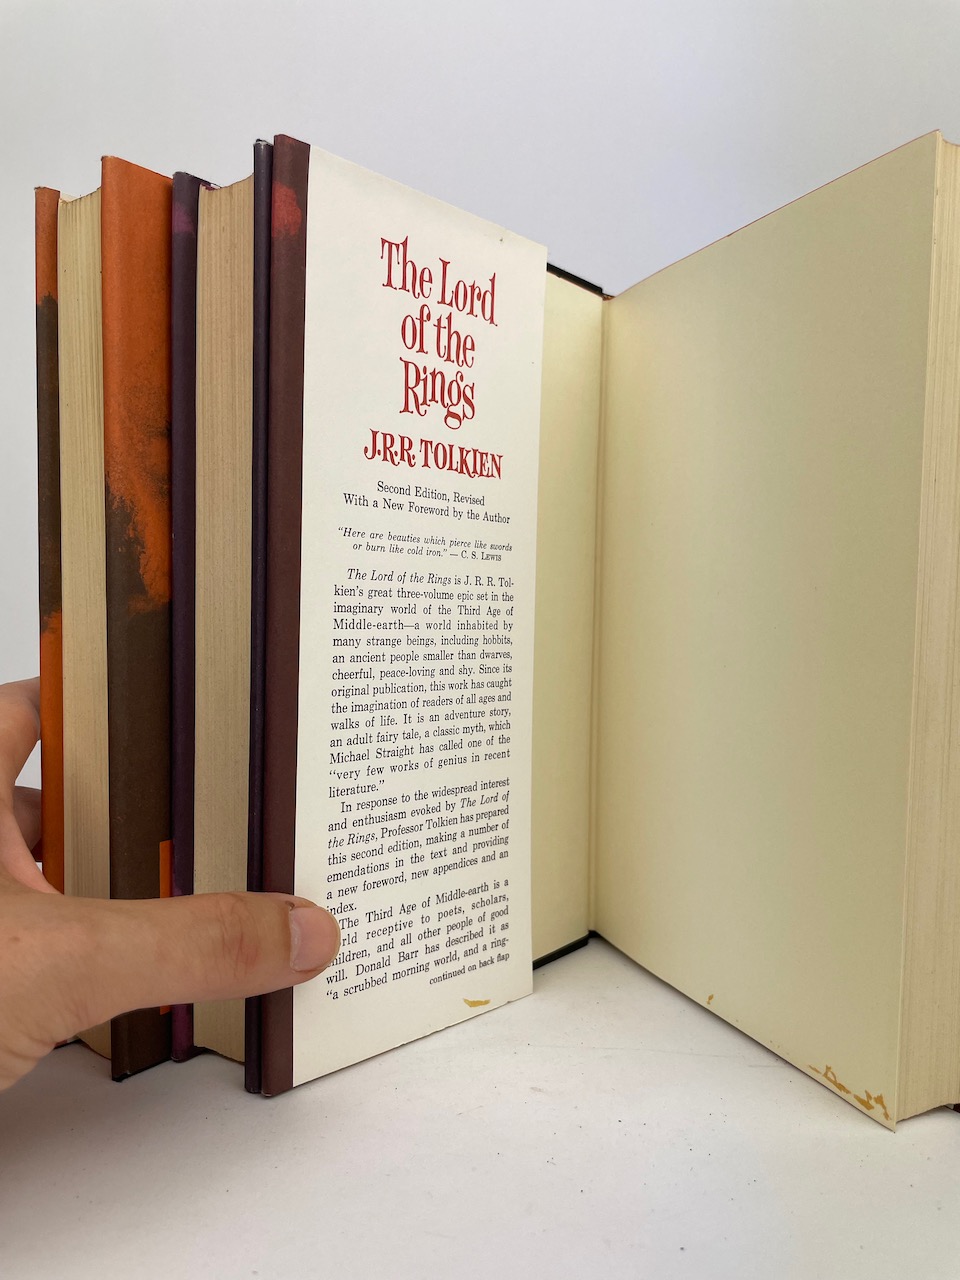 The Lord of the Rings, 2nd US Edition in Original Publishers Slipcase 9th/8th/8th 15